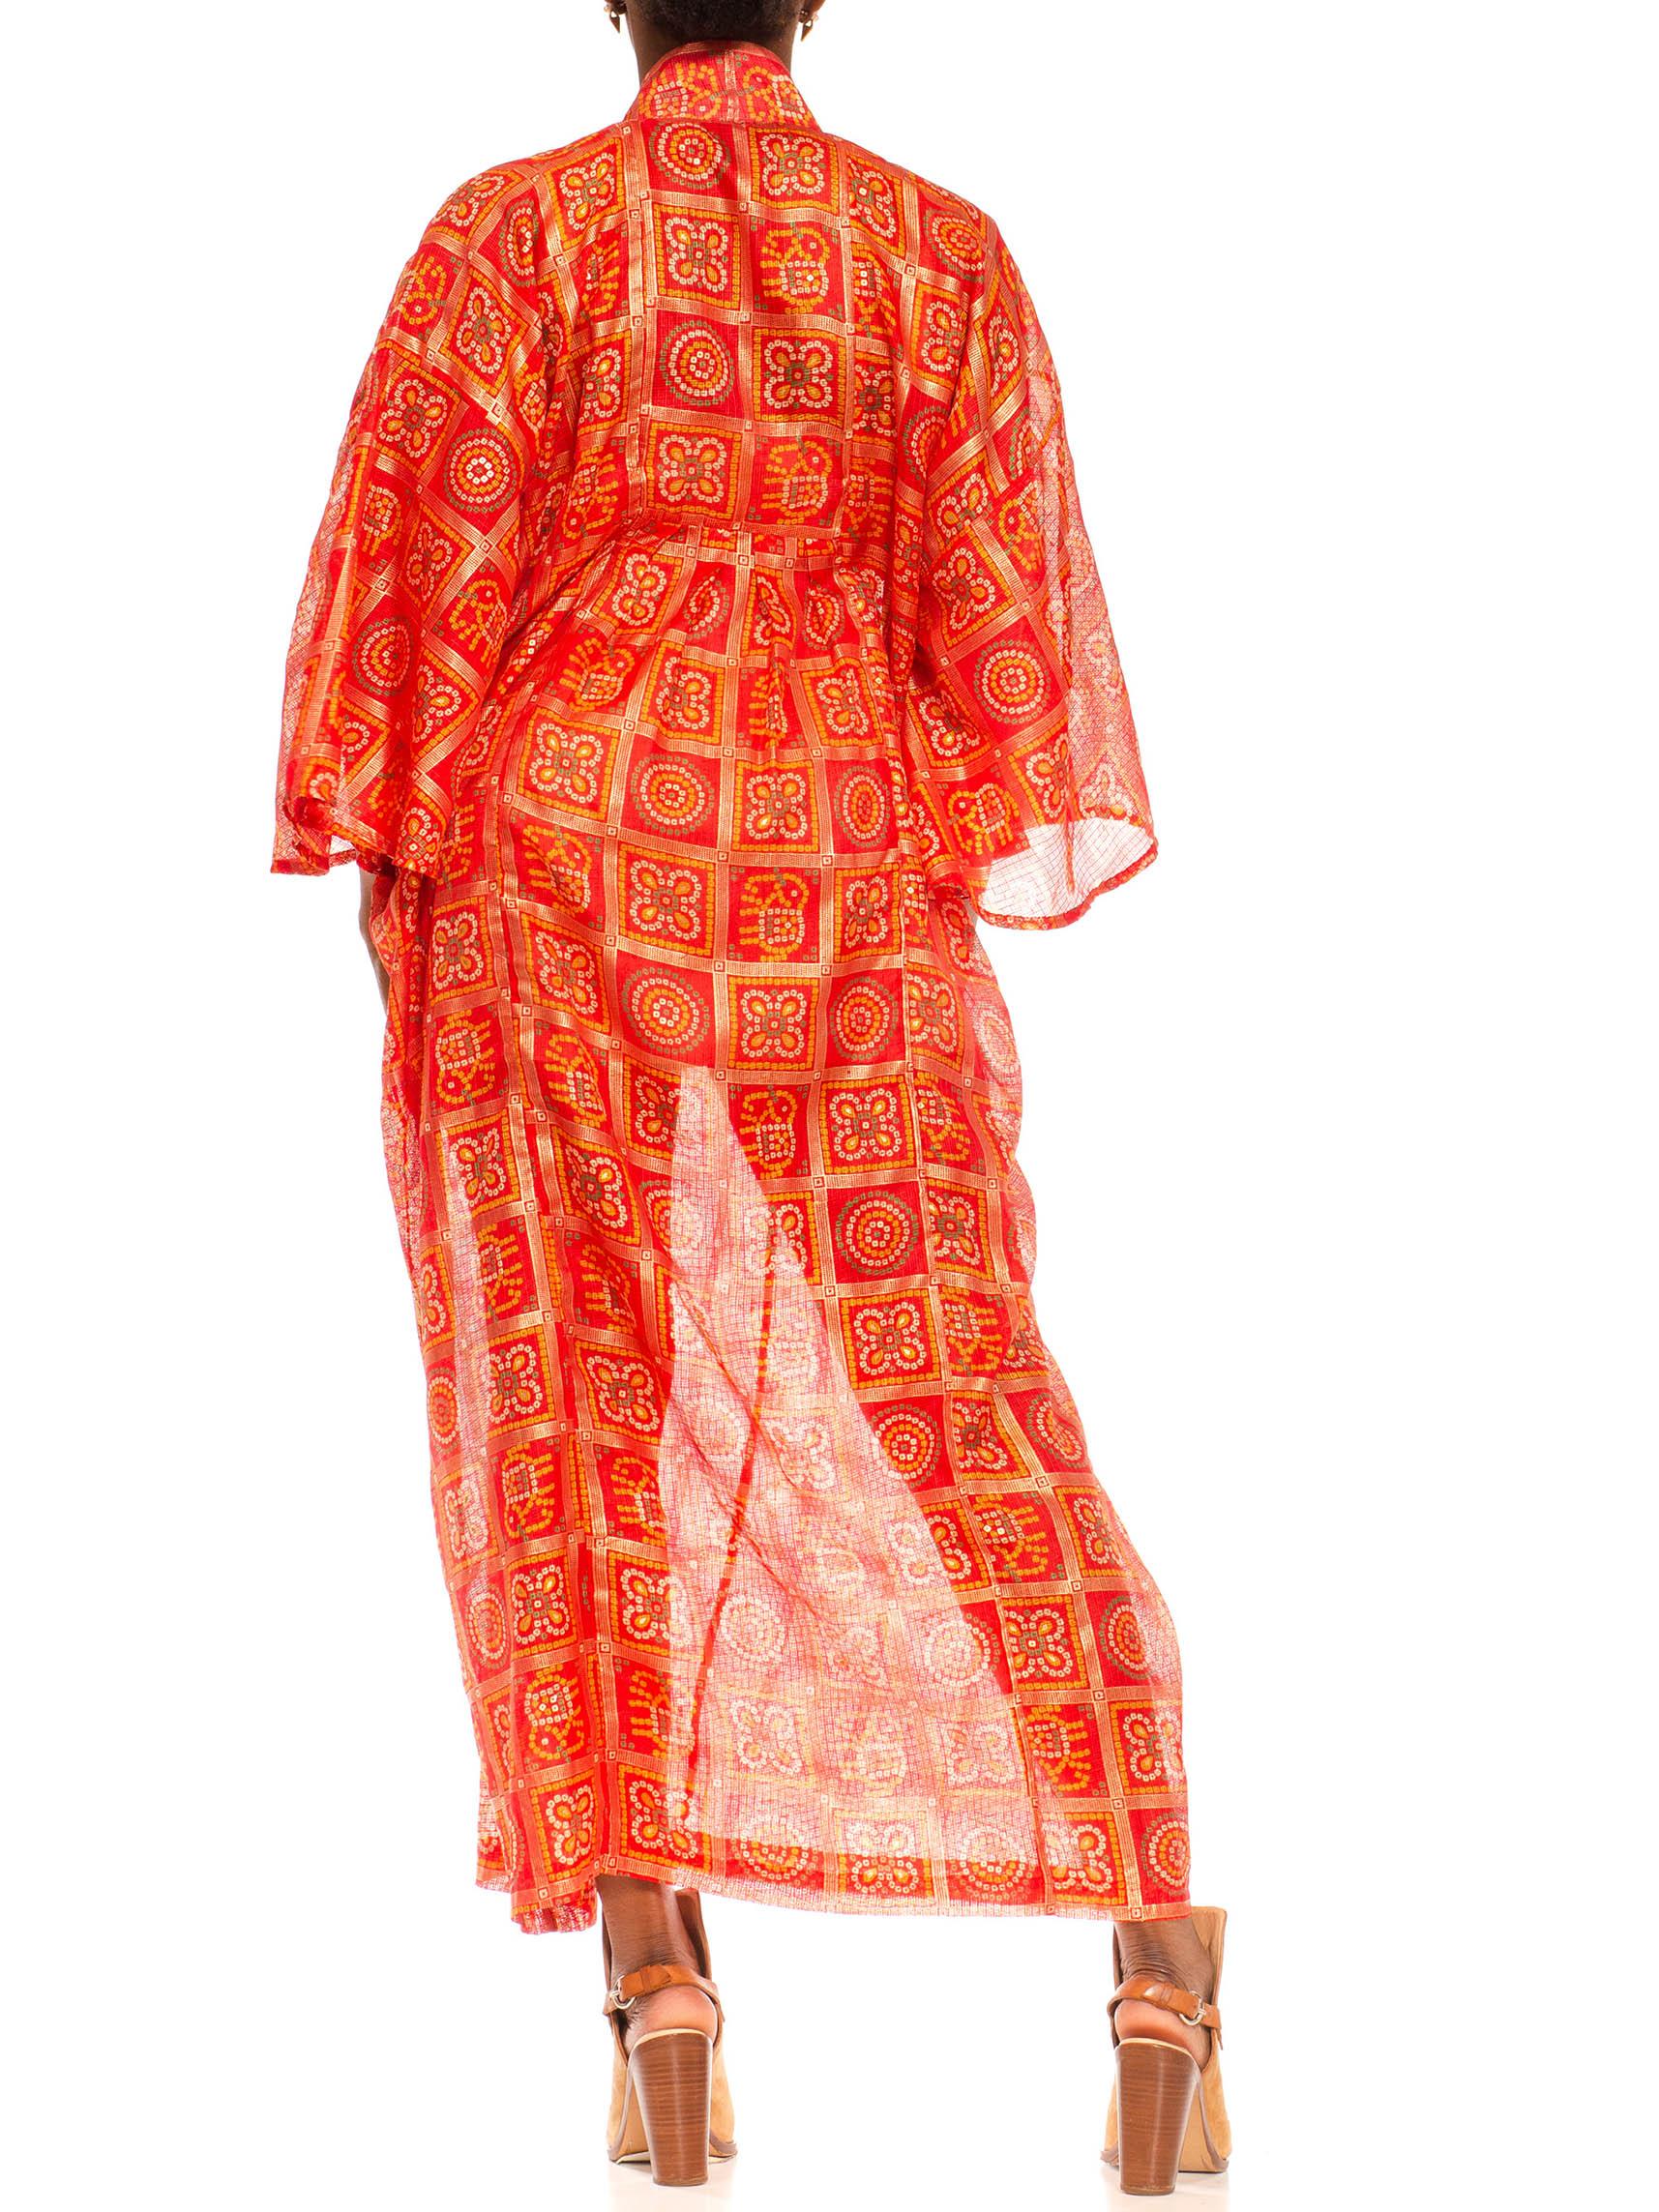 Morphew Collection Red & Gold Polyester Geometric Kaftan Made From Vintage Saris For Sale 5